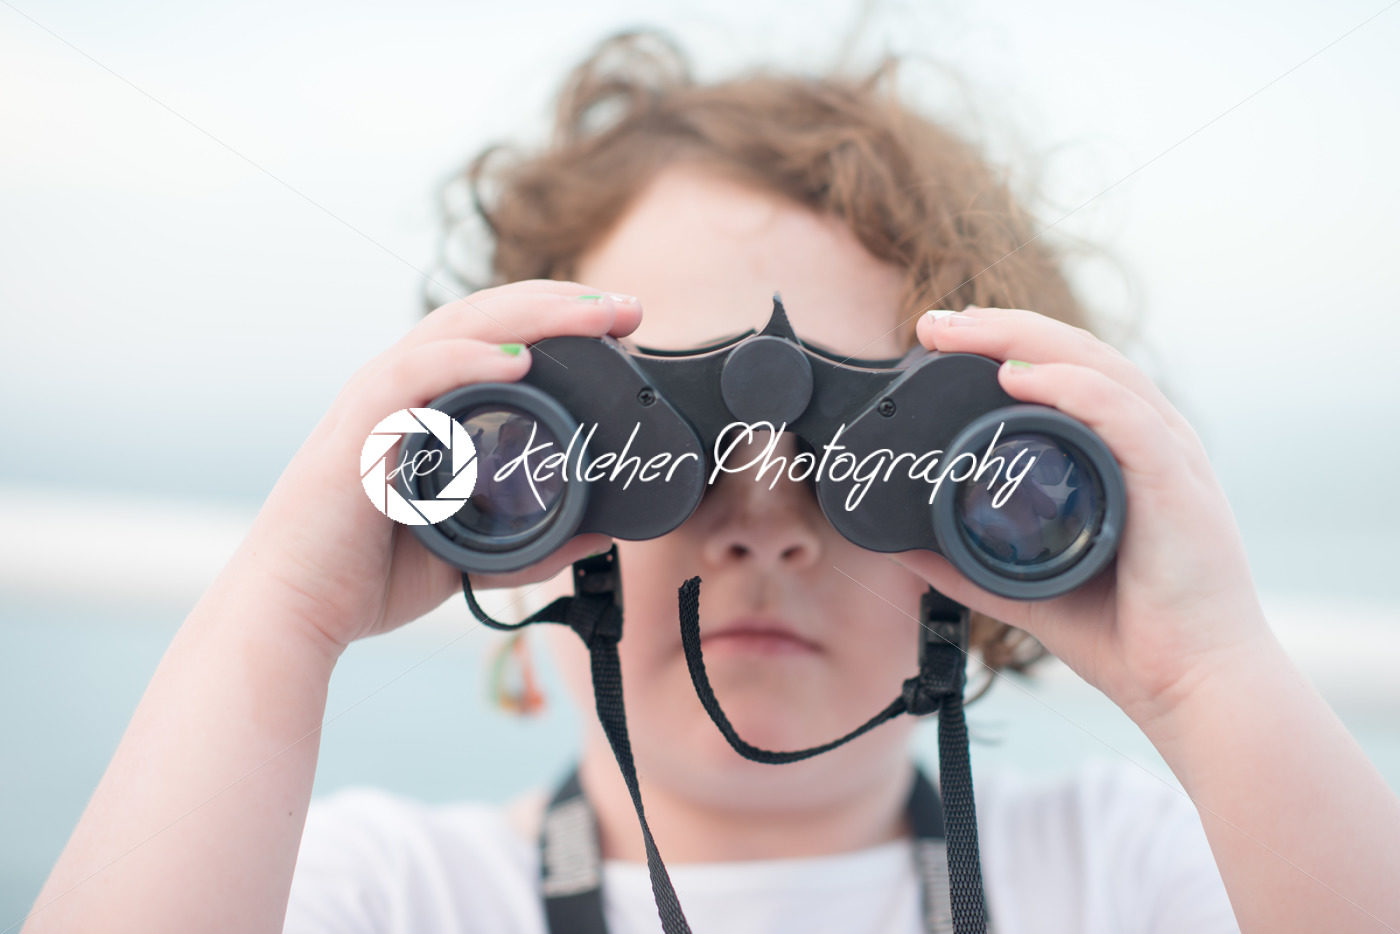 Beautiful young girl on boat looking directly at camera through binoculars - Kelleher Photography Store